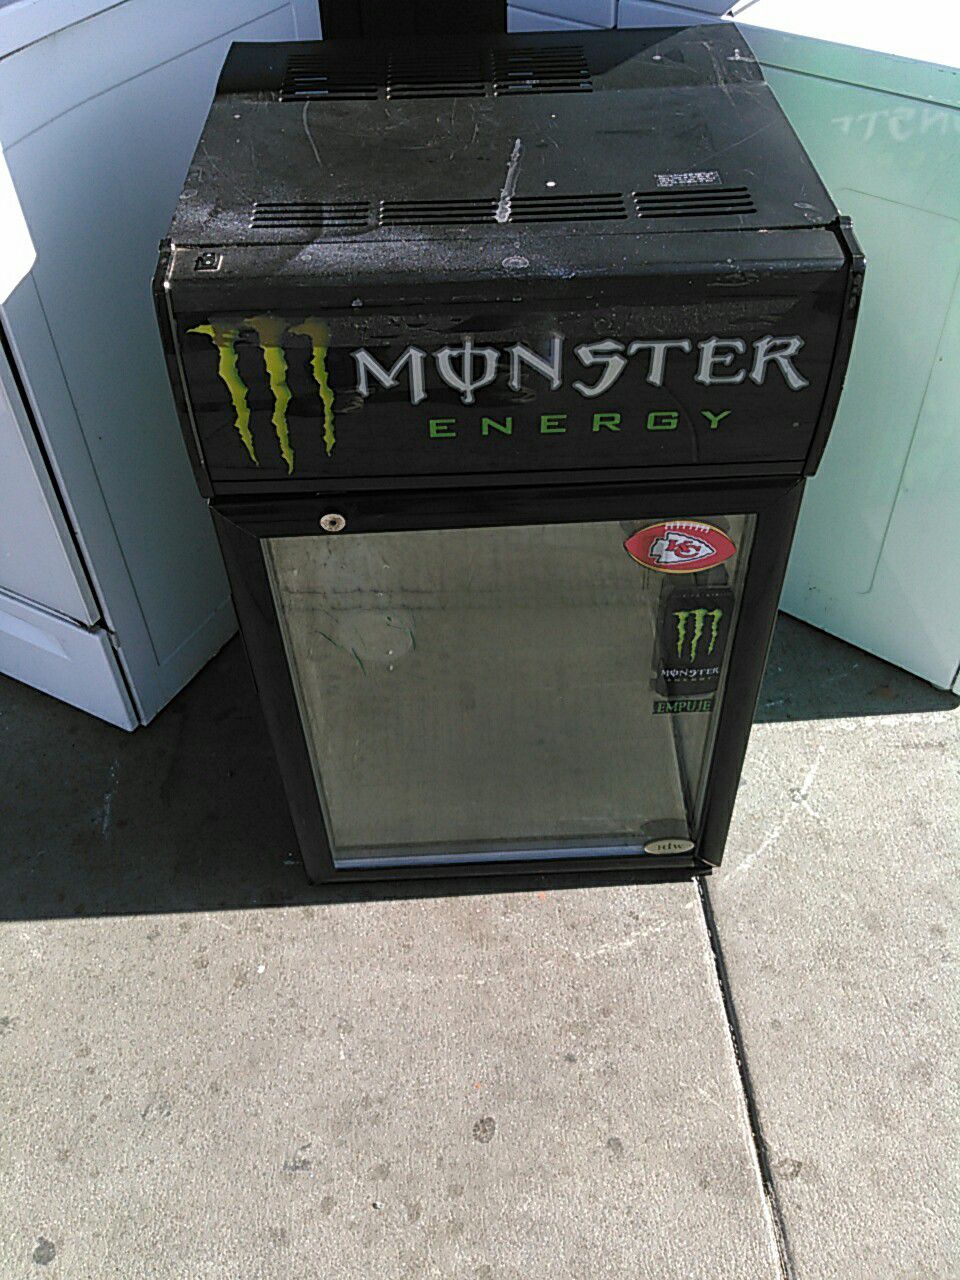 Monster energy mini fridge delivered & installed with a "30" day warranty